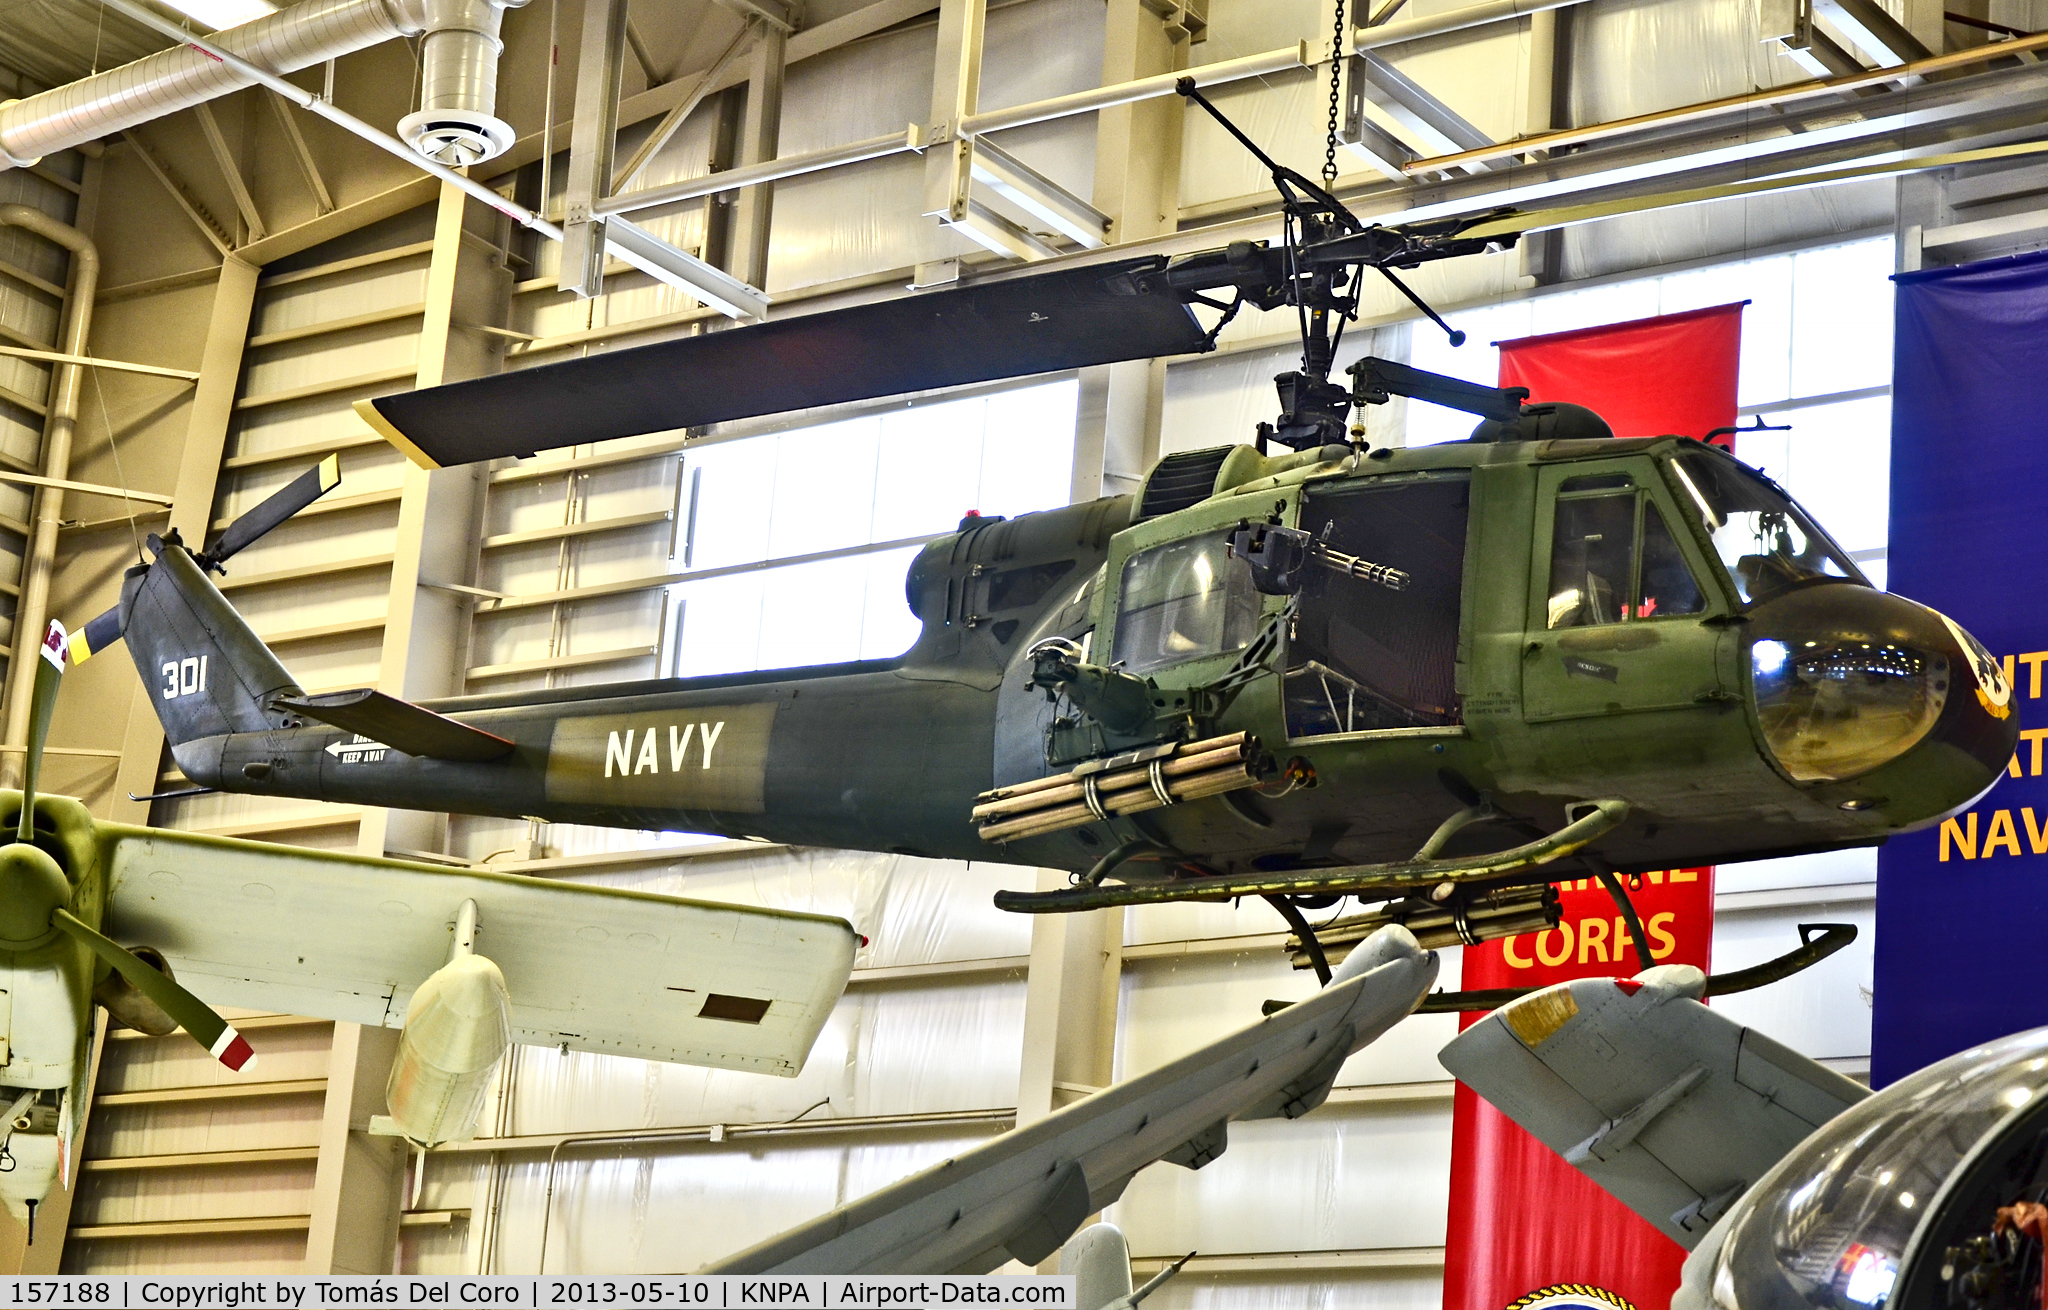 157188, 1970 Bell HH-1K Iroquois C/N 6312, Bell HH-1K (UH-1E) Iroquois  BuNo 157188 (cn 6312)

National Naval Aviation Museum
TDelCoro
May 10, 2013